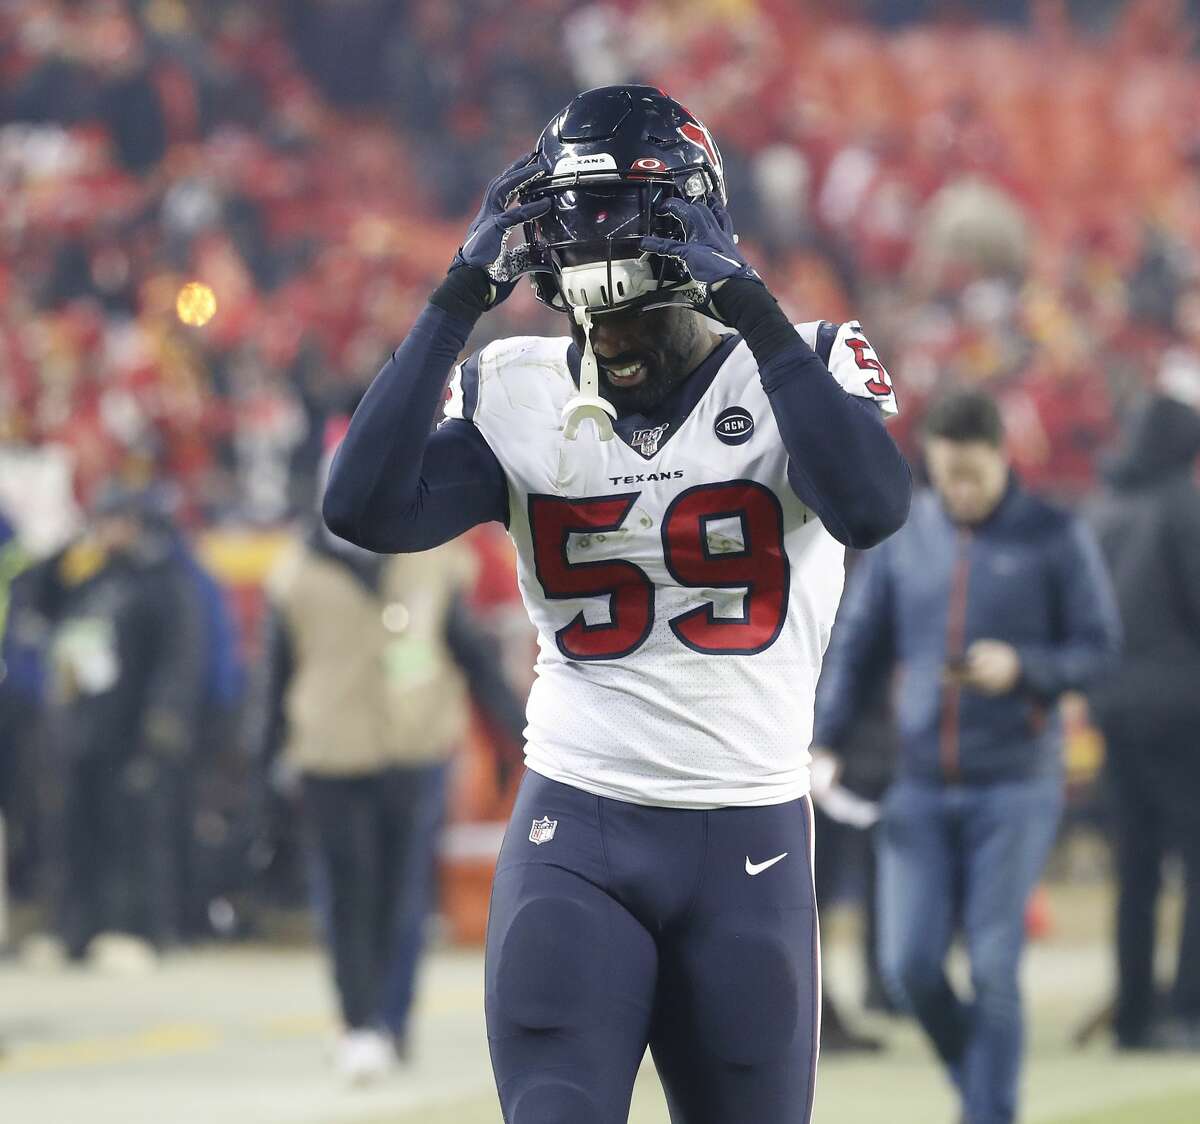 Houston Texans outside linebacker Whitney Mercilus (59) reacts as he walks back to the locker room after the Texans loss to the Kansas City Chiefs during an AFC divisional playoff game at Arrowhead Stadium on Sunday, Jan. 12, 2020, in Kansas City, Mo.